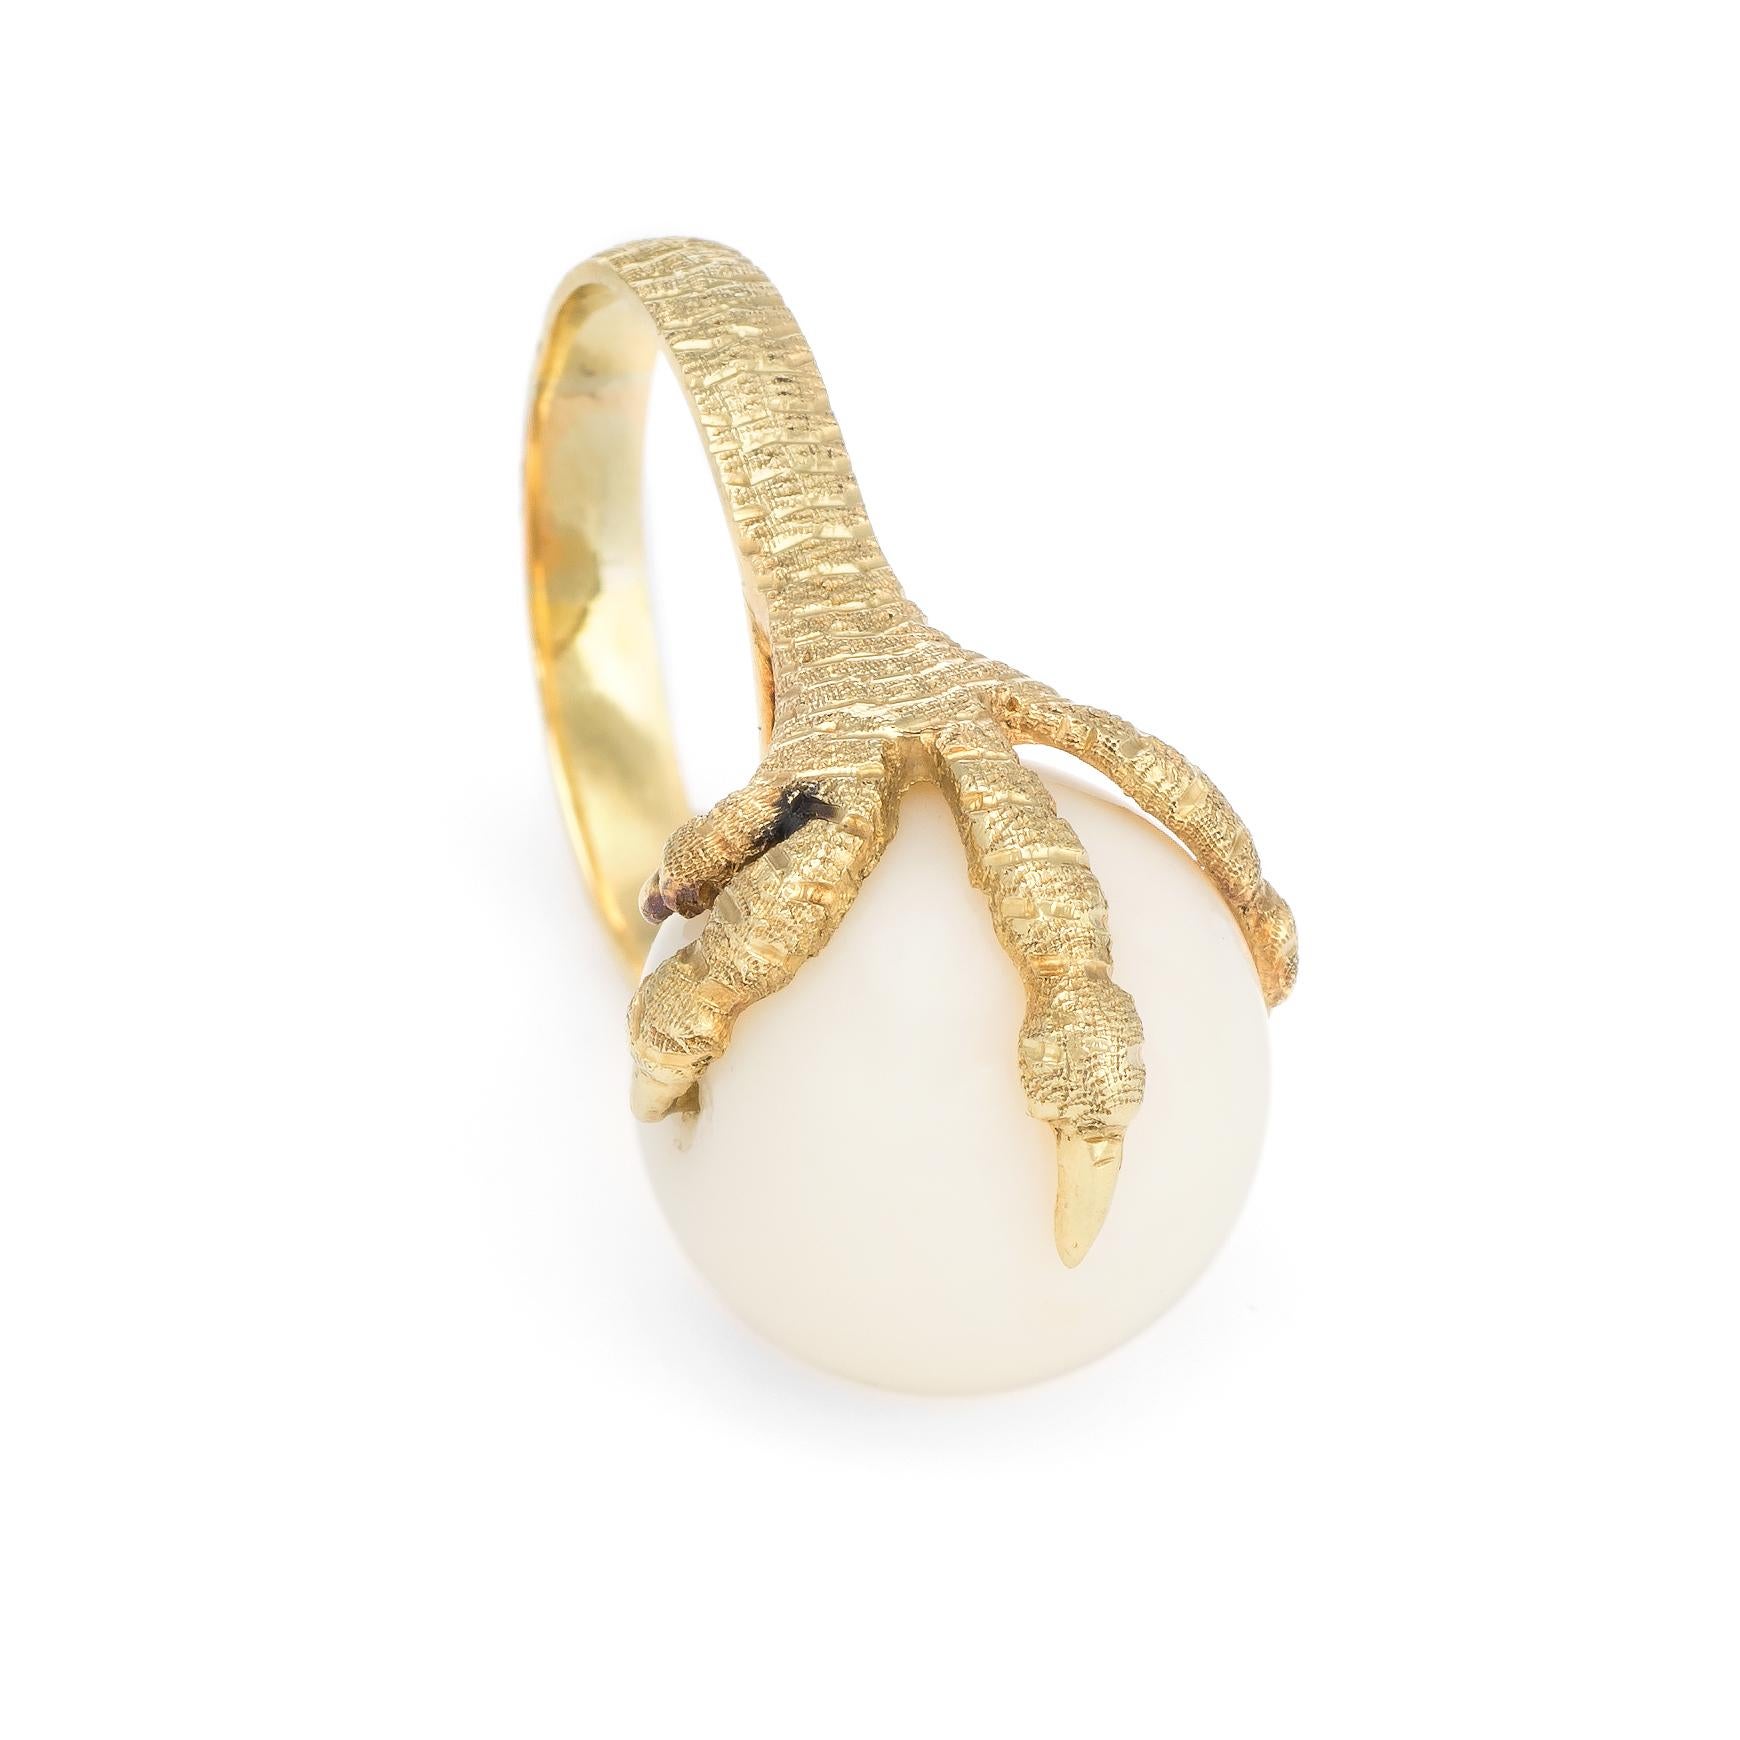 Distinct & stylish vintage dragons claw cocktail ring (circa 1960s to 1970s), crafted in 18 karat yellow gold. 

The angel skin coral orb measures 16mm. The coral is in excellent condition and free of cracks or chips. 

The dragons claw features